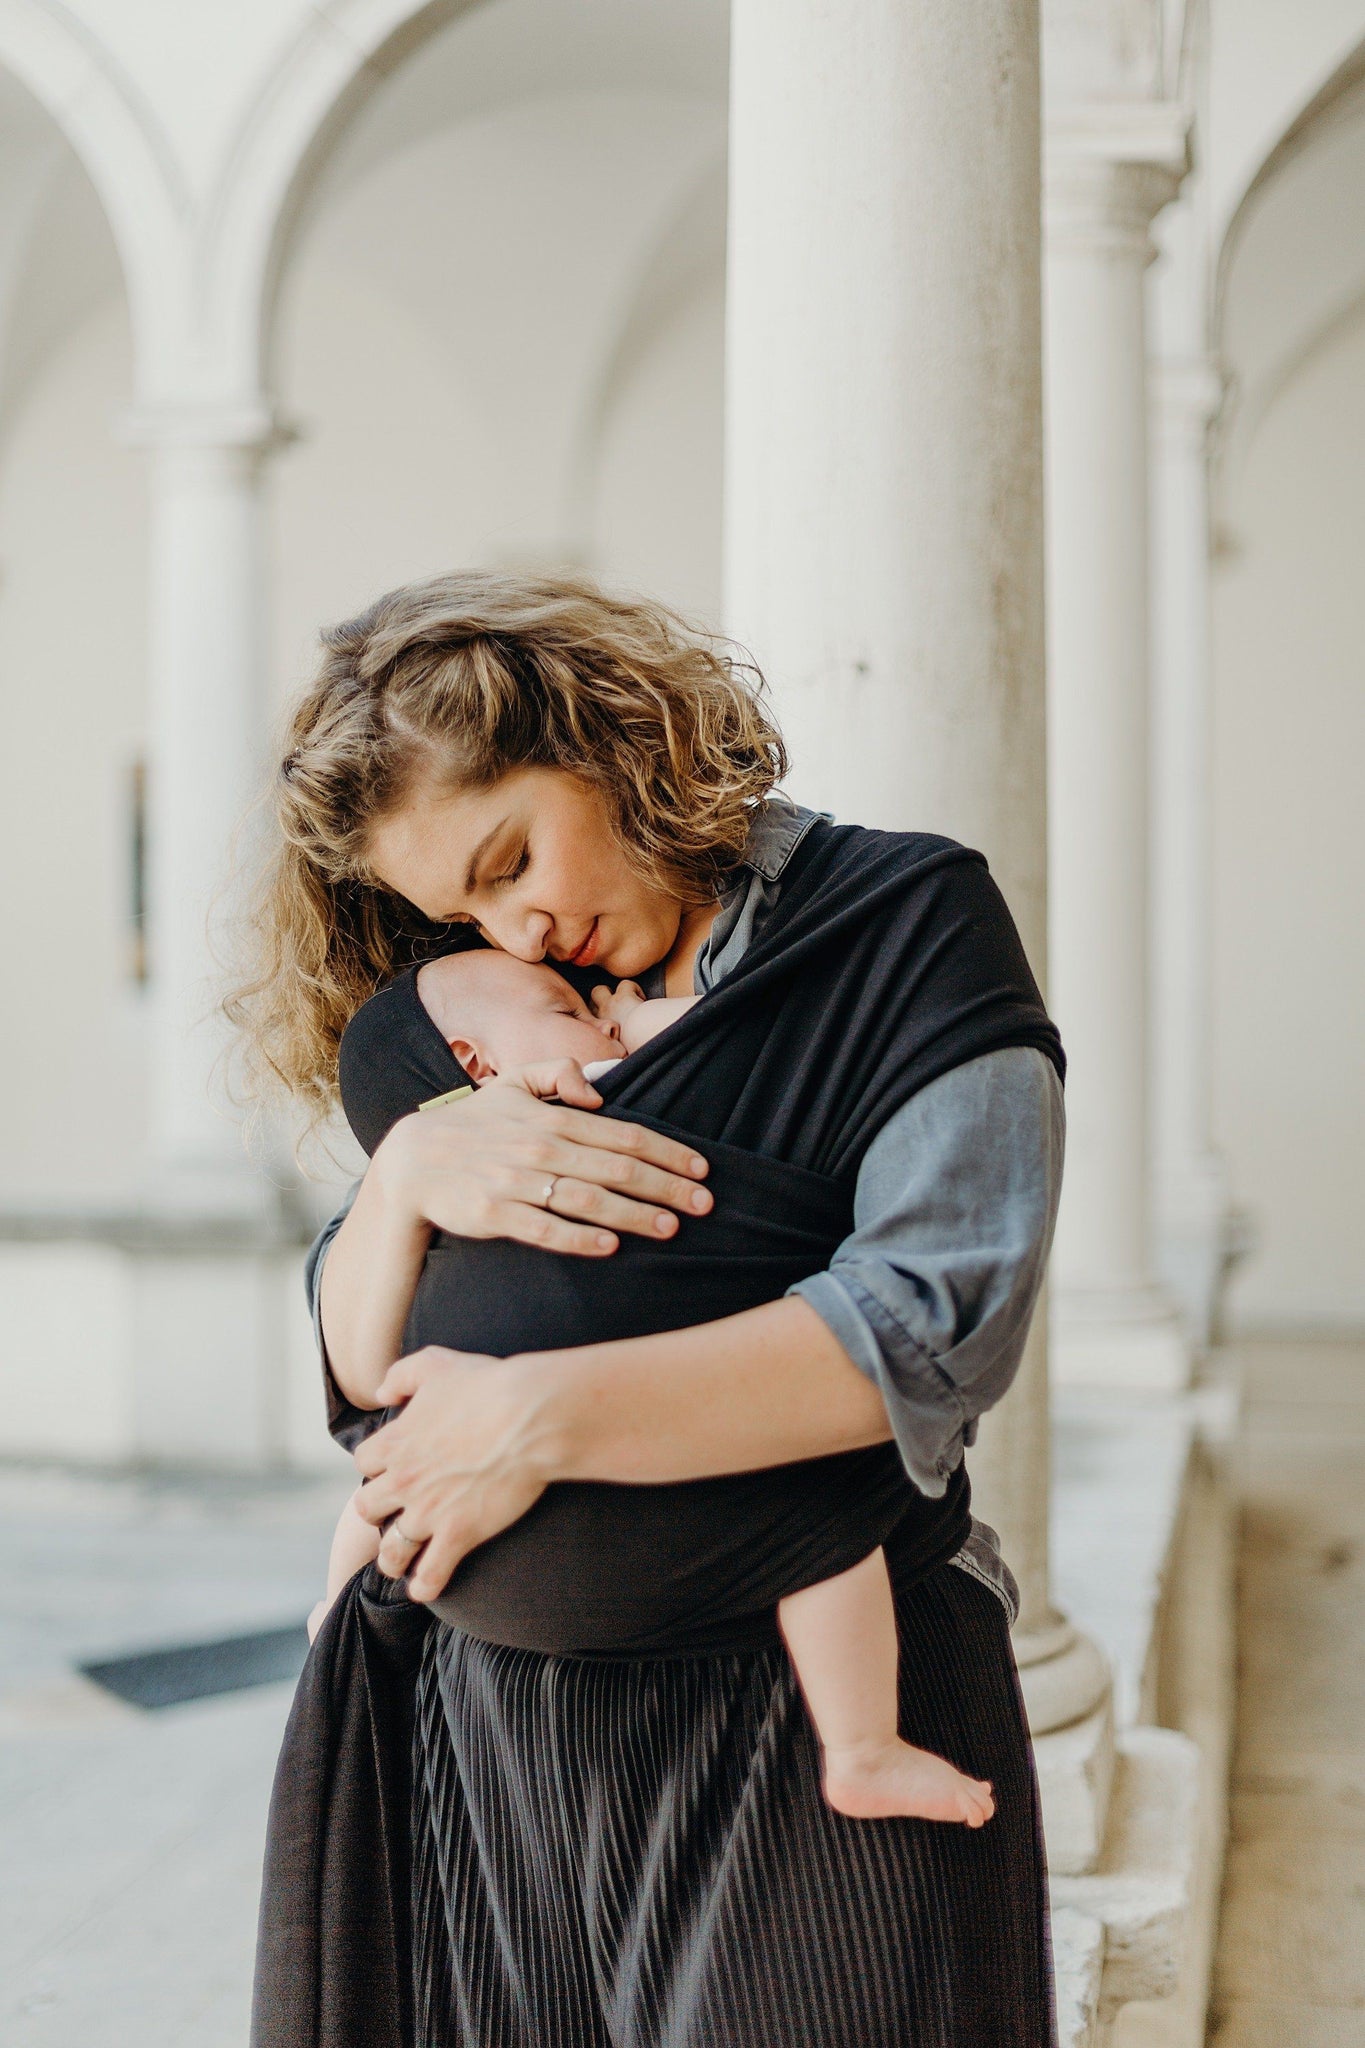 Get the perfect combination of comfort and convenience with Boba's award winning Baby Wrap! Crafted from a buttery soft French Terry fabric blend, it allows you to carry your little one hands-free while also providing breastfeeding privacy. Certified hip healthy by International Hip Dysplasia Institute too!